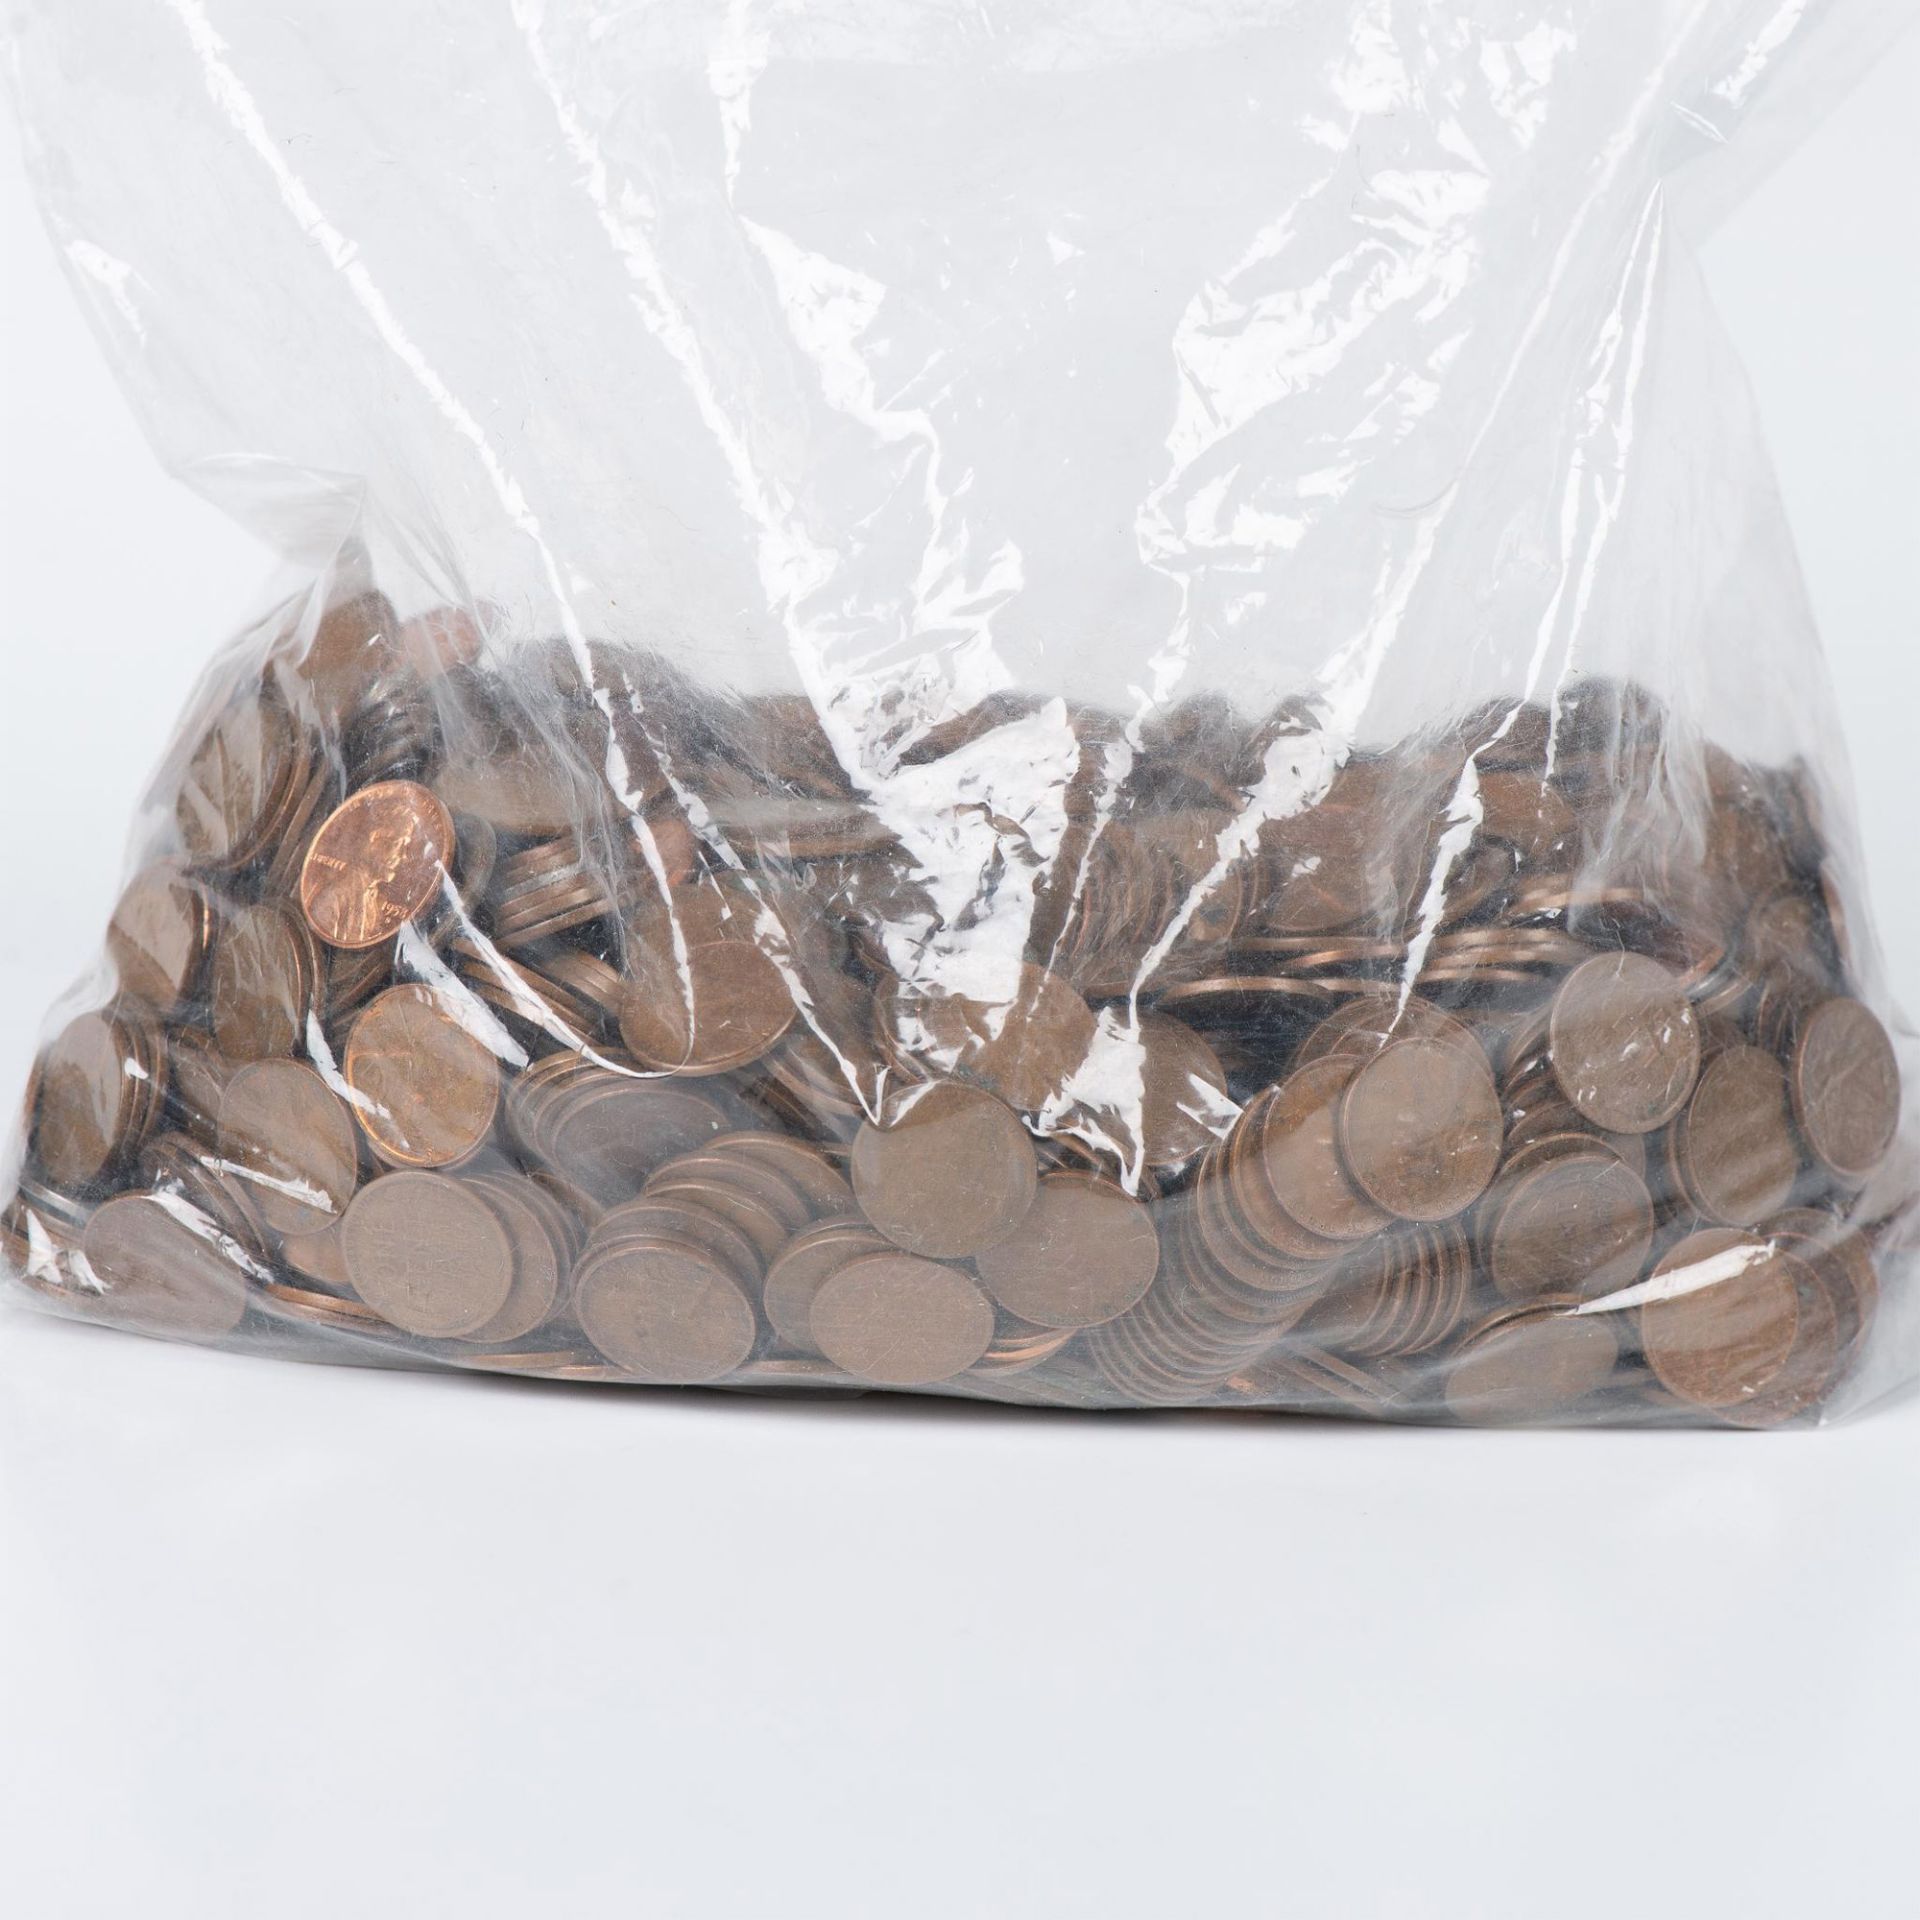 10LB BAG OF 1,500 UNSEARCHED LINCON WHEAT CENT COINS - Image 9 of 9